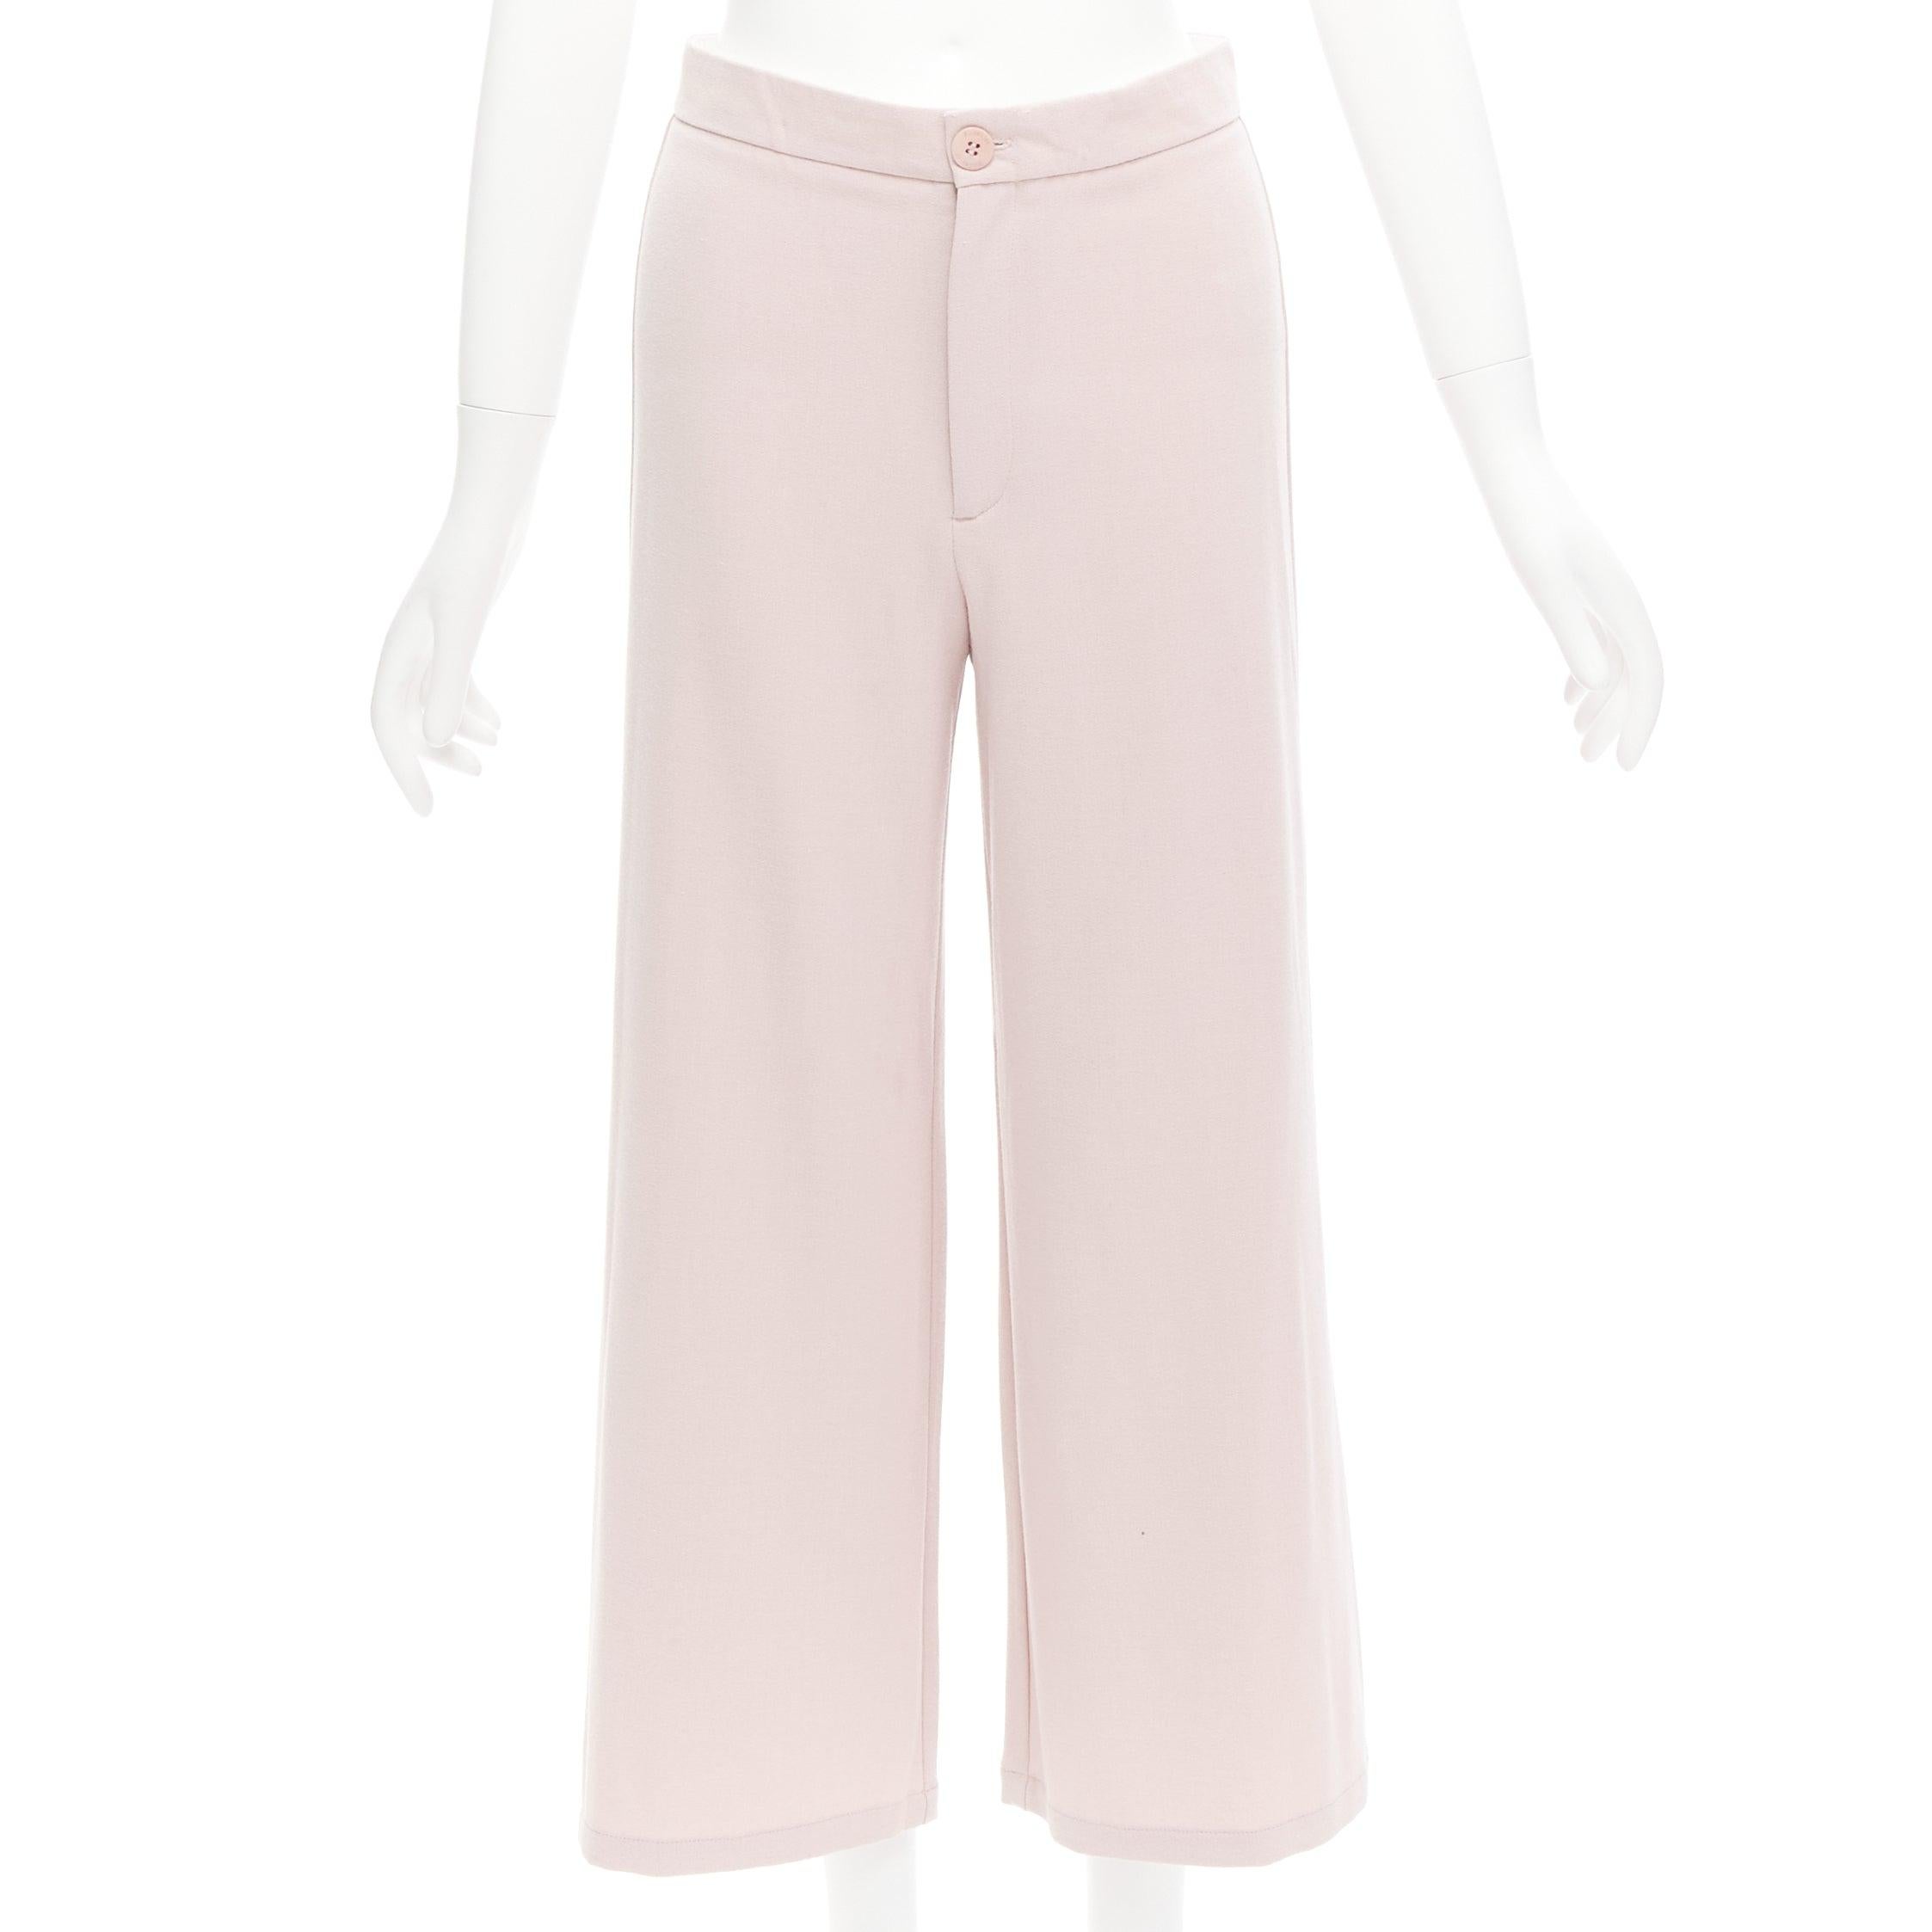 RODEBJER Odessa dusty pink belted long line robe jacket wide pants set XS For Sale 4